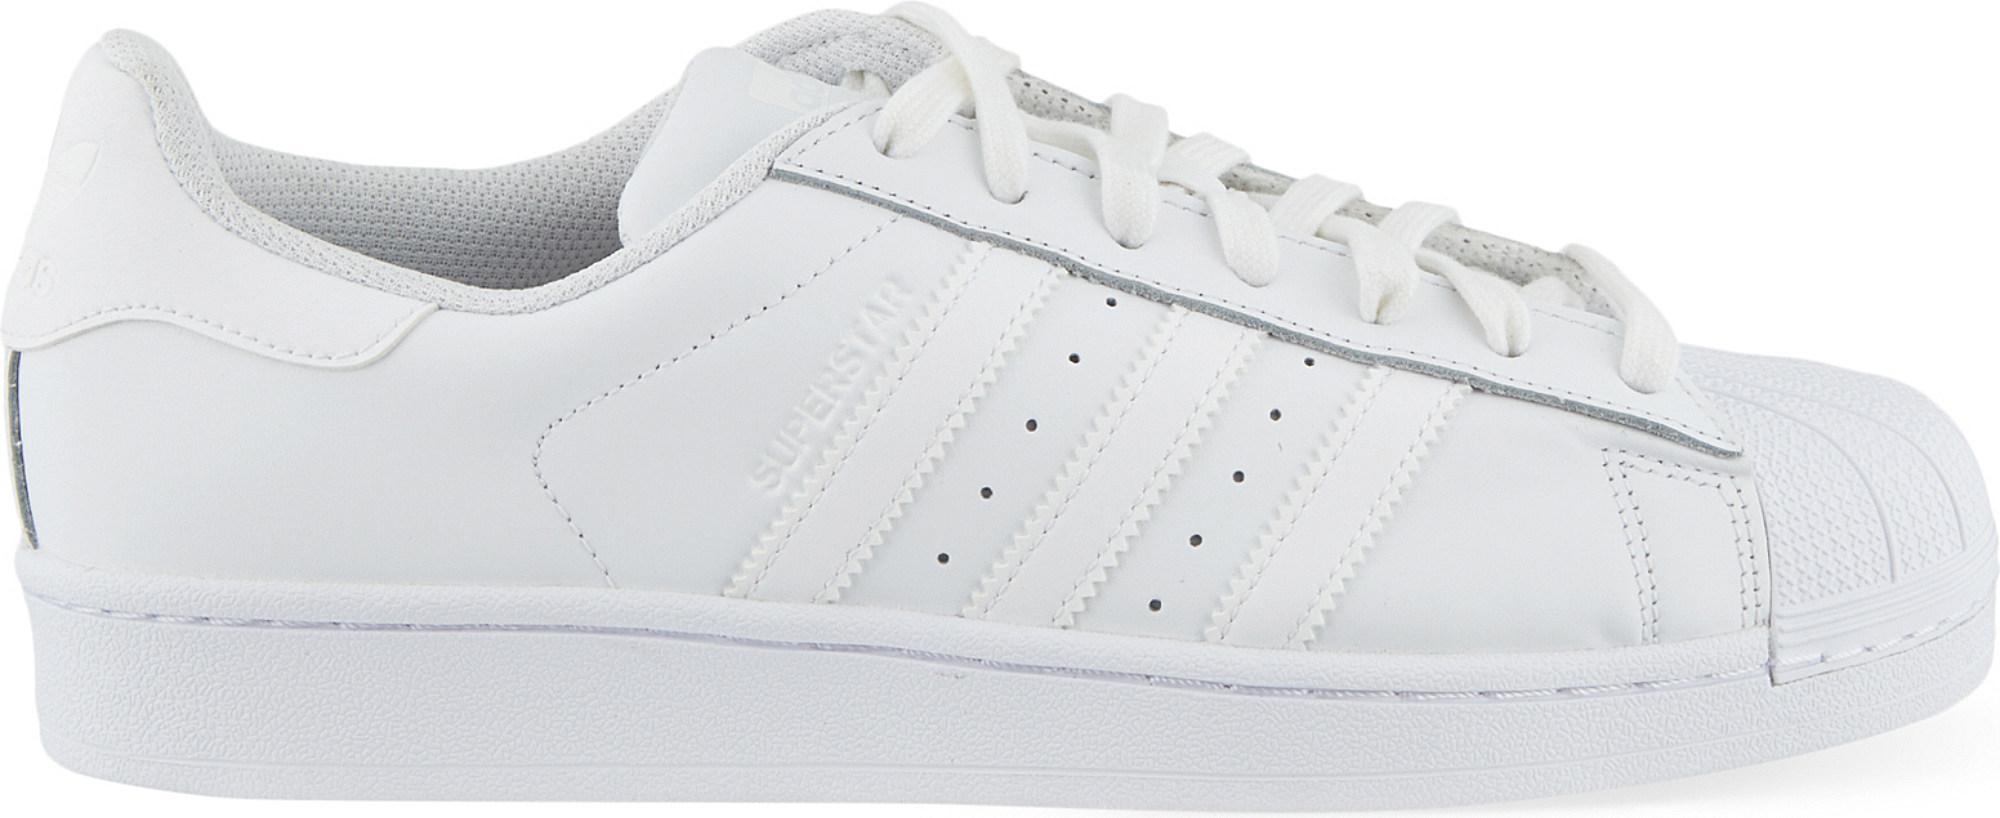 Lyst - Adidas Superstar 1 Trainers in White - Save 82%